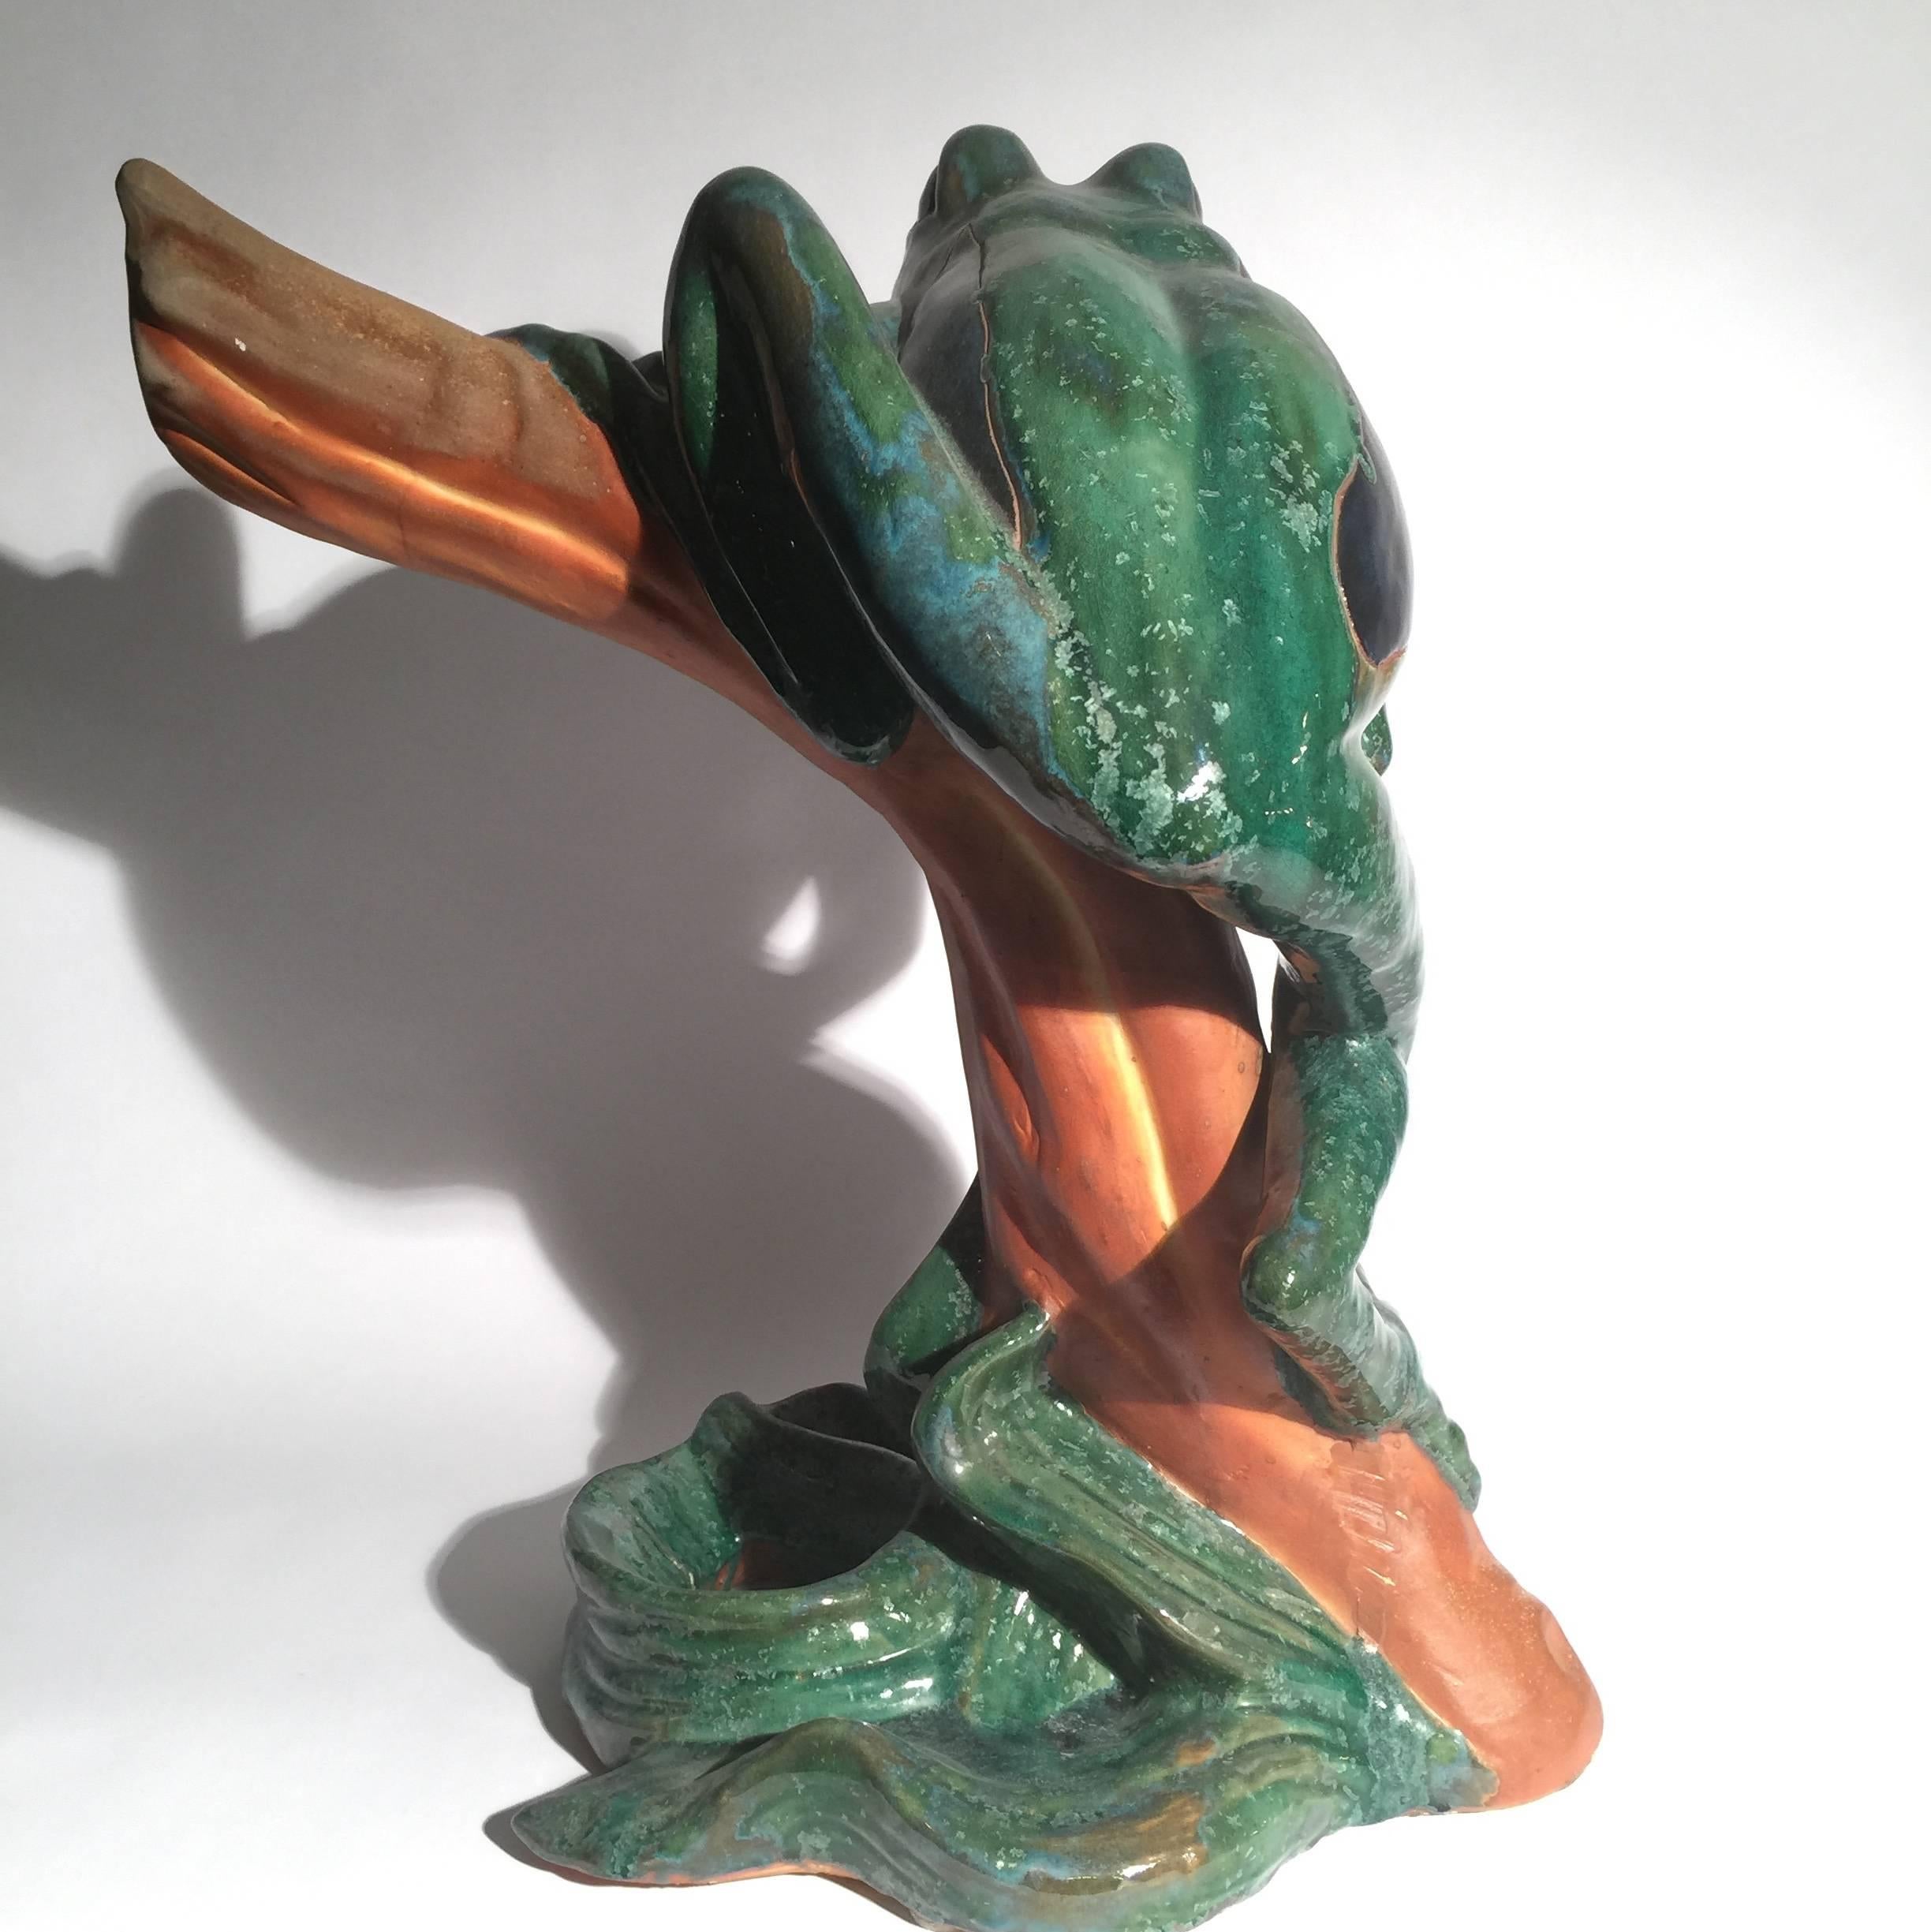 20th Century Large Whimsical Midcentury Faience Sculpture of a Frog